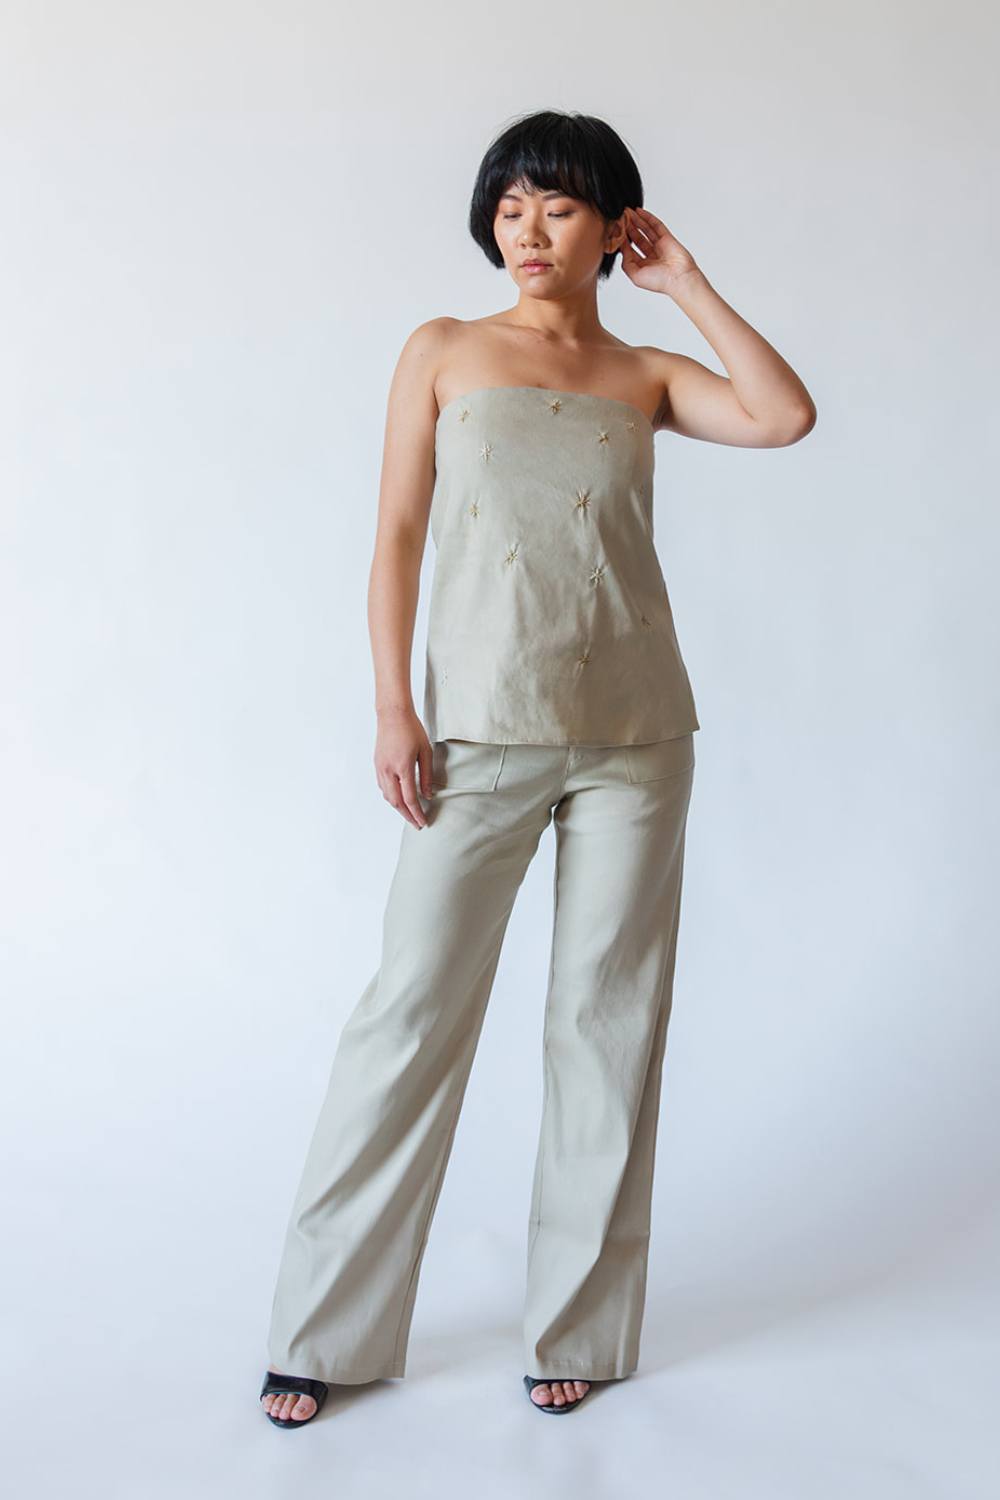 Linen summer Tops for women and a women owned ethical clothing brand